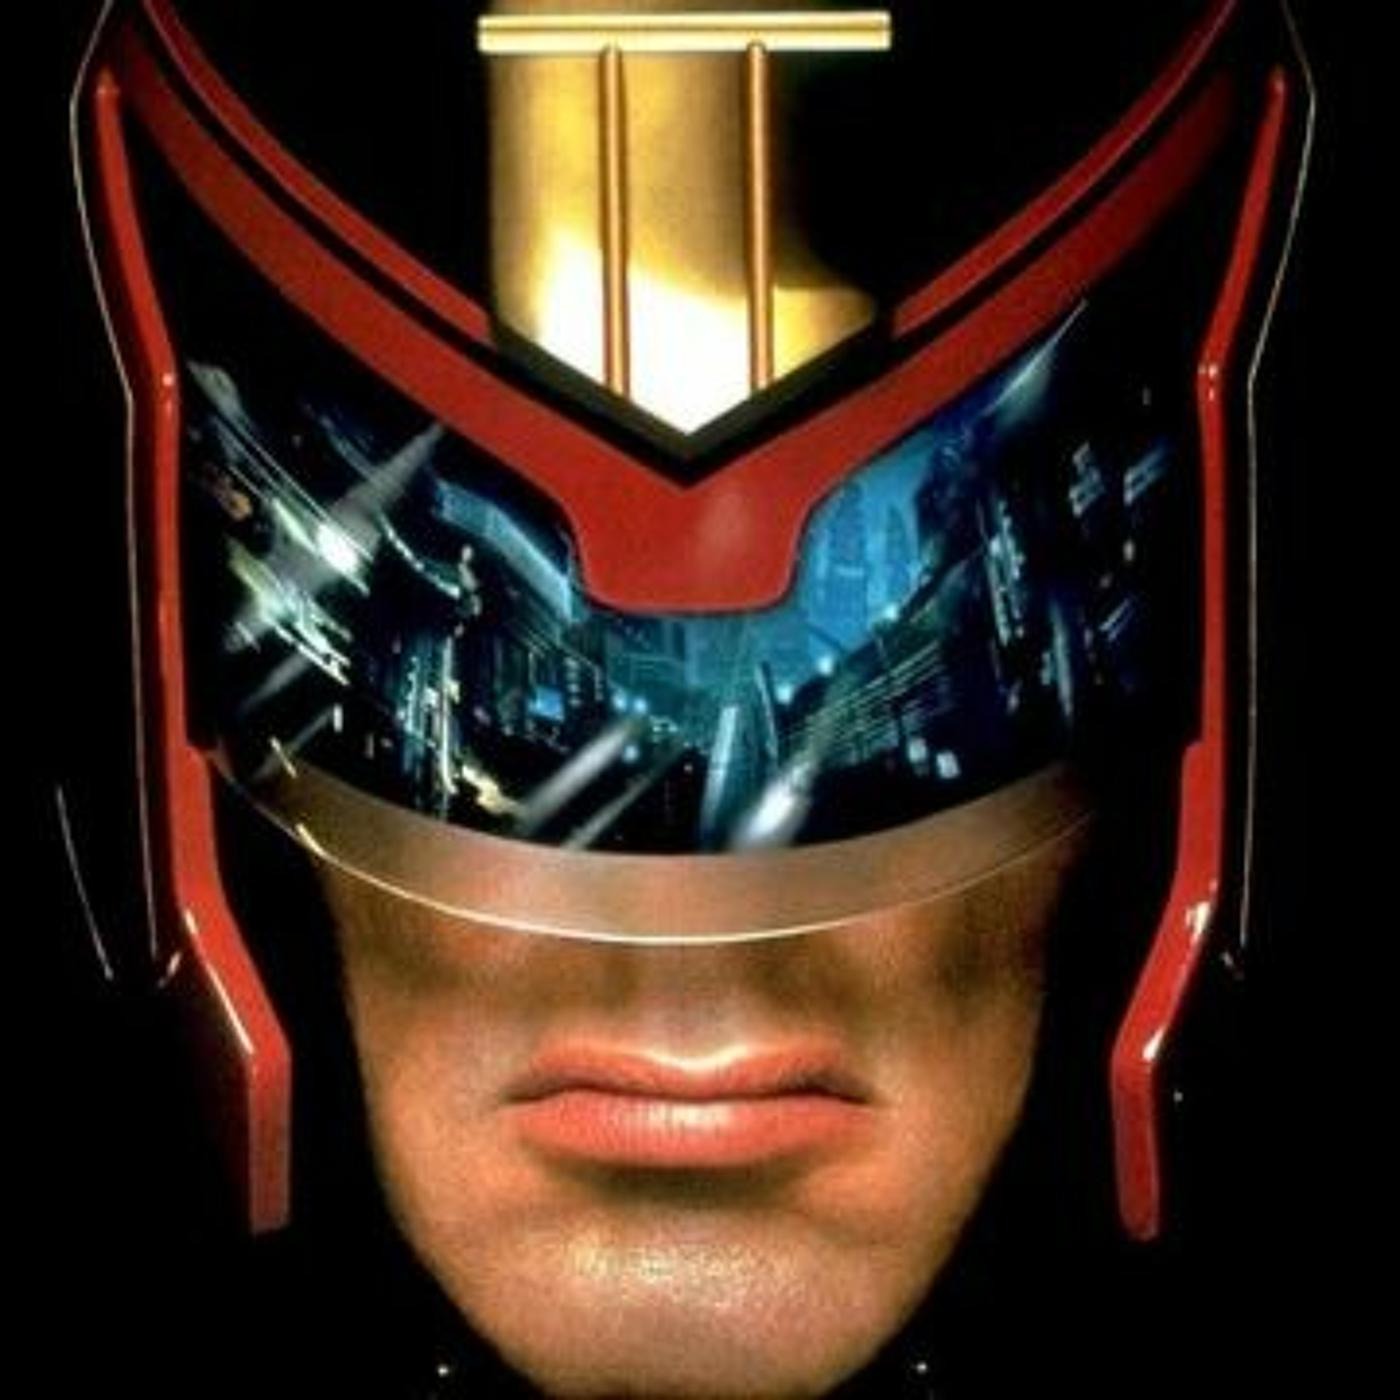 GVN Presents: They Called This a Movie - Judge Dredd (1995)